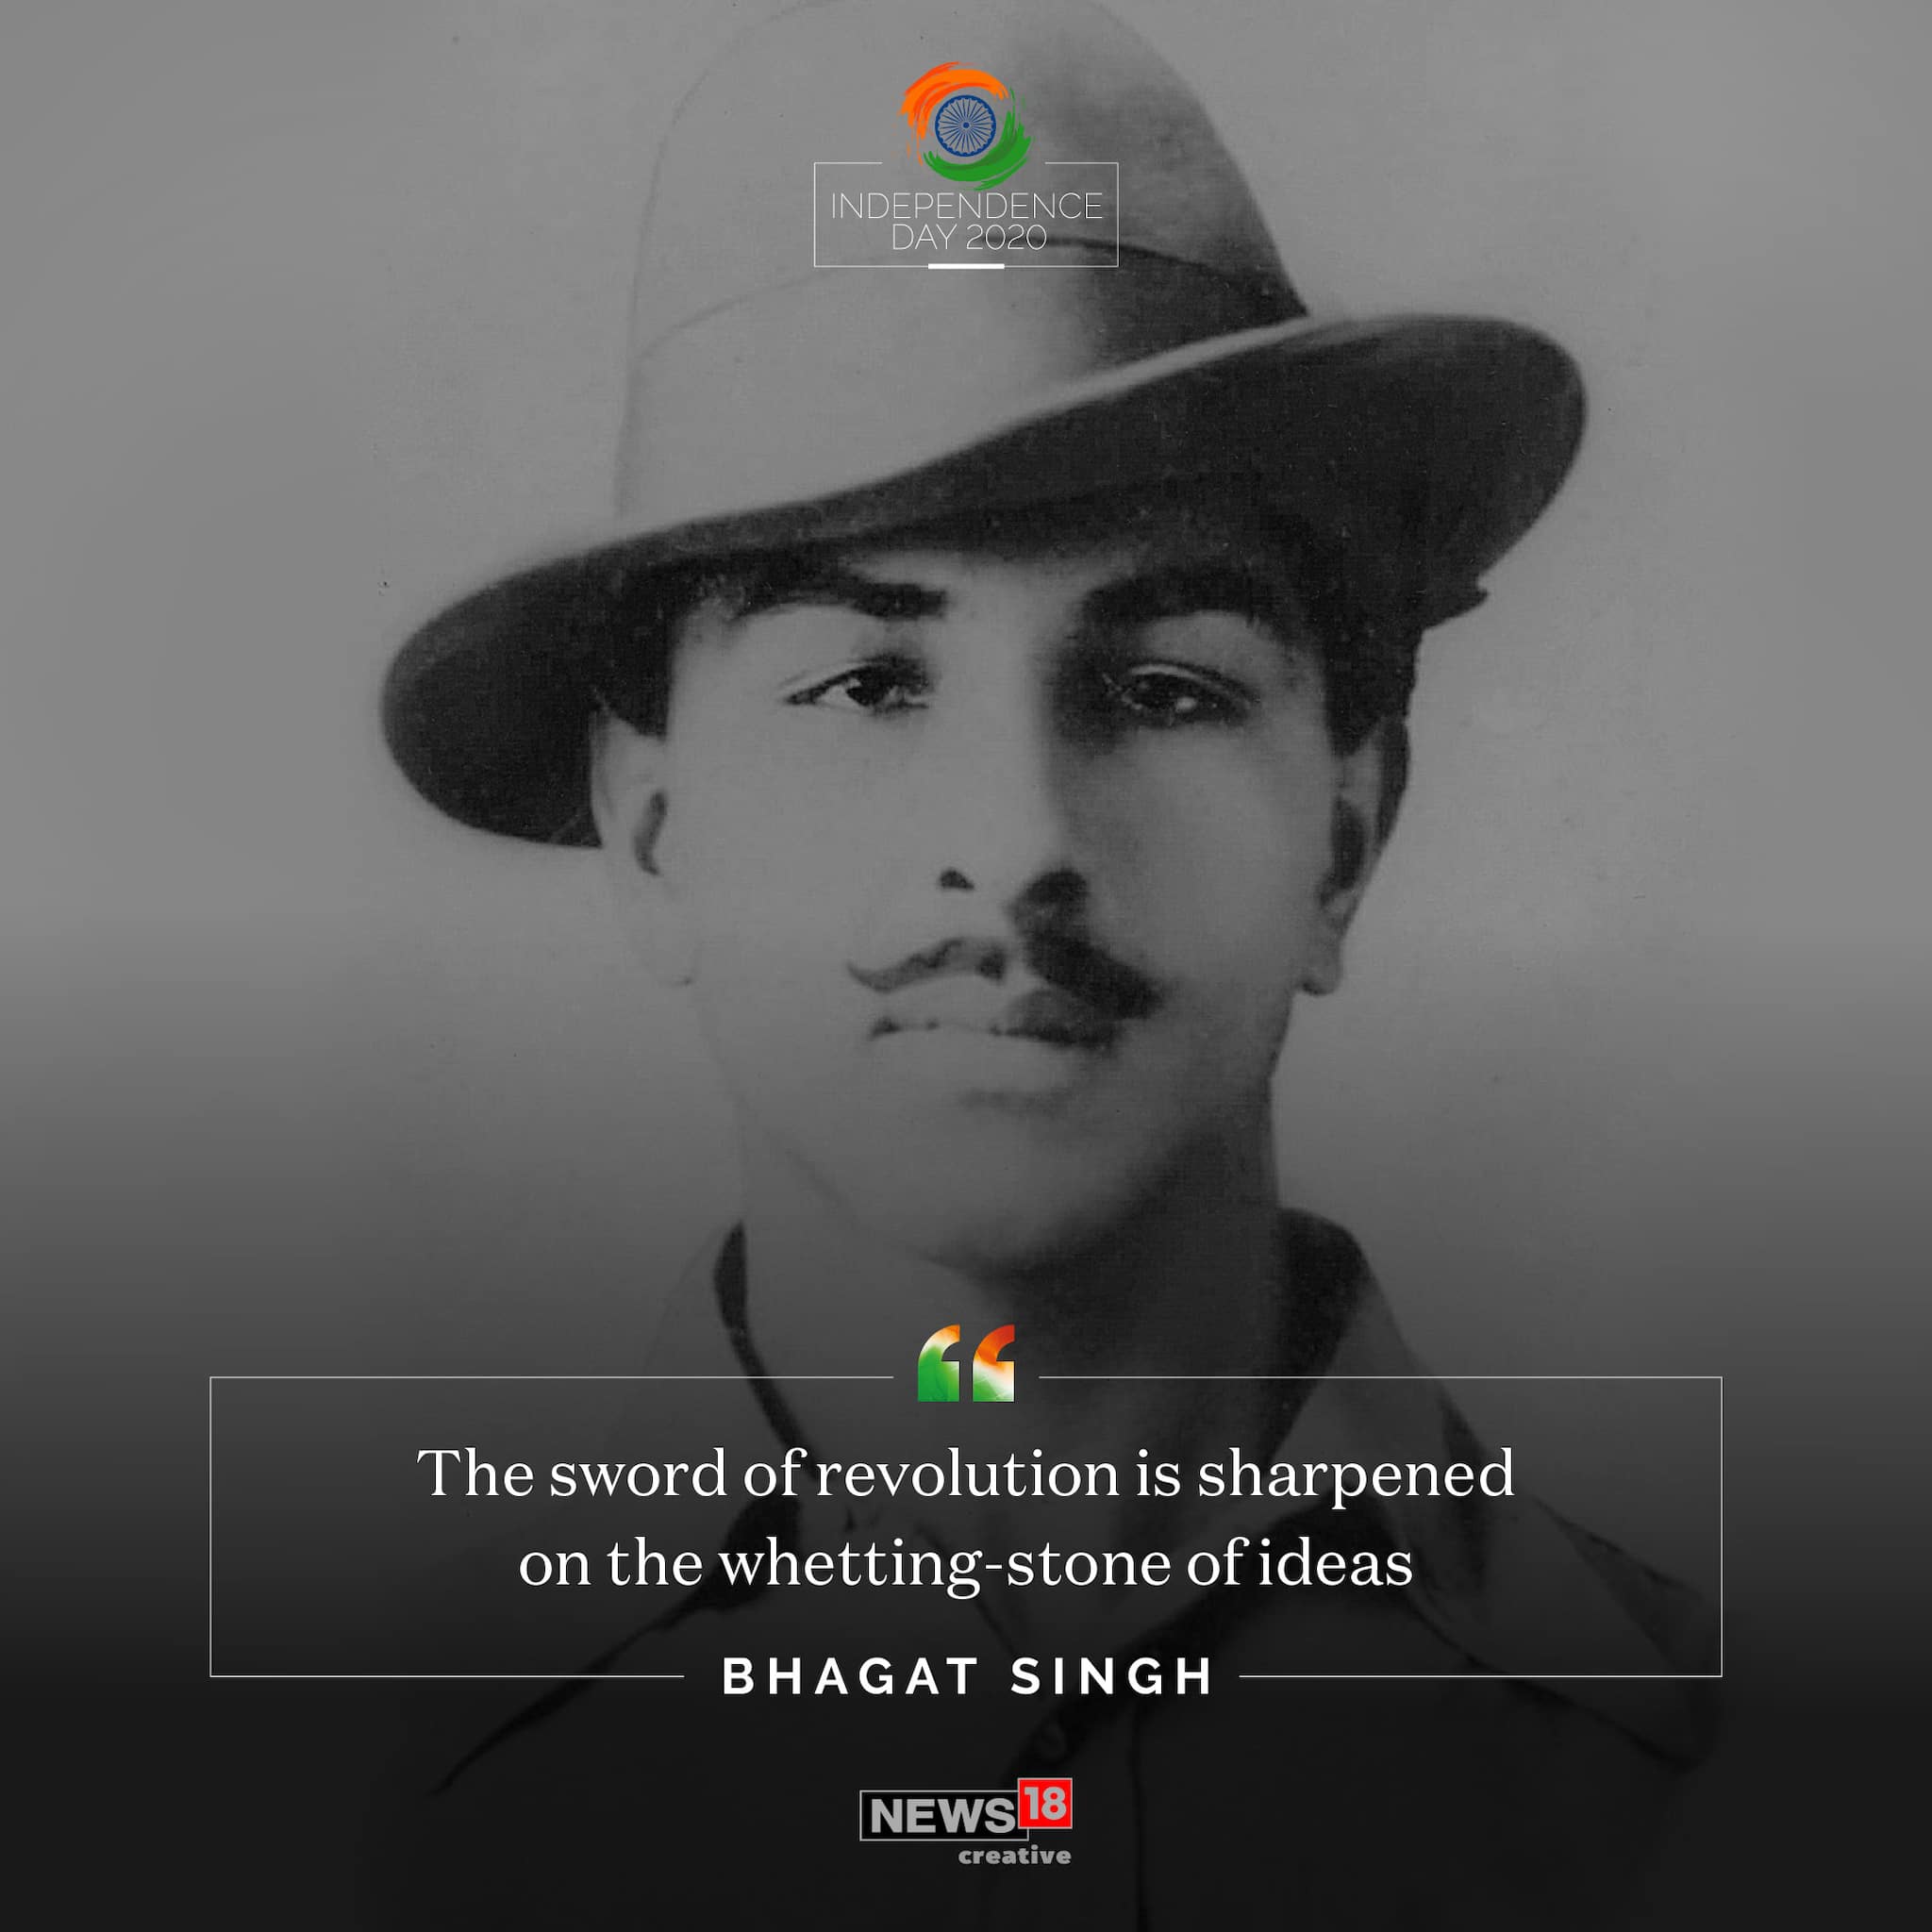 'The sword of revolution sharpened on the whetting-stones of ideas' quote by Bhagat Singh 